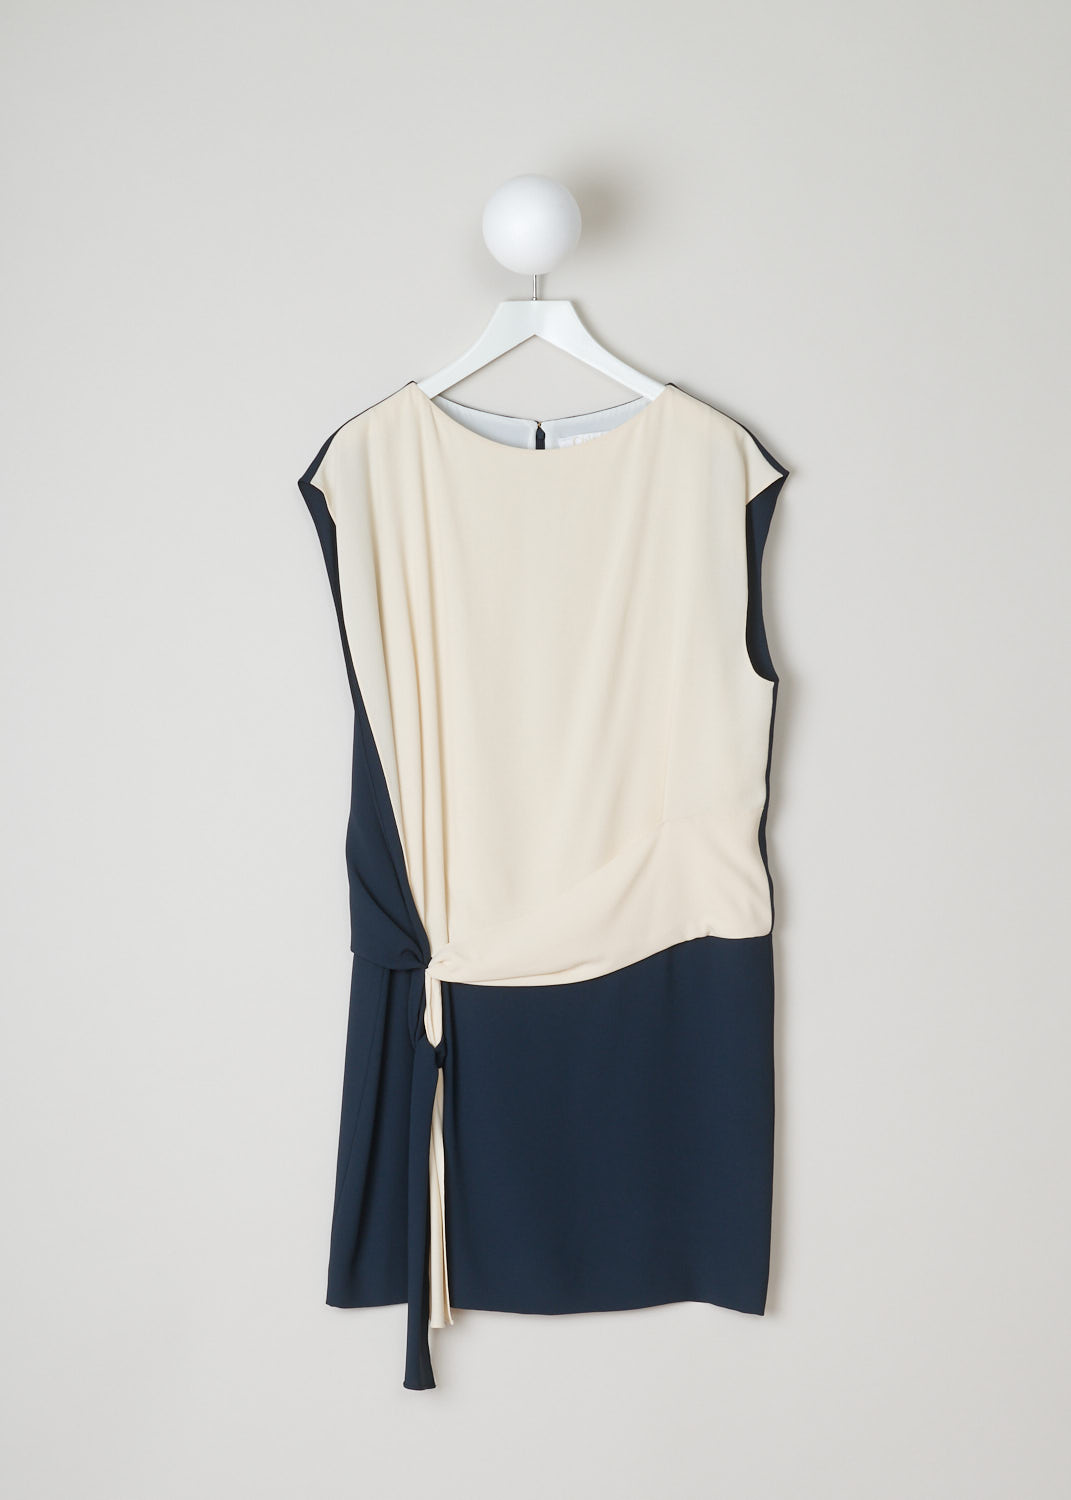 Chloé, Dropped waist dress in beige and blue, 15SRO18_15S238_1Z7_black_navy_vanilla, blue beige, front. Dropped waist dress, sharing some similarities with a wrap dress. The blue and beige wrap ribbon can be tied into various knots. Furthermore, this sleeveless model has a round neckline and a concealed zipper with a metal clip on the back. 